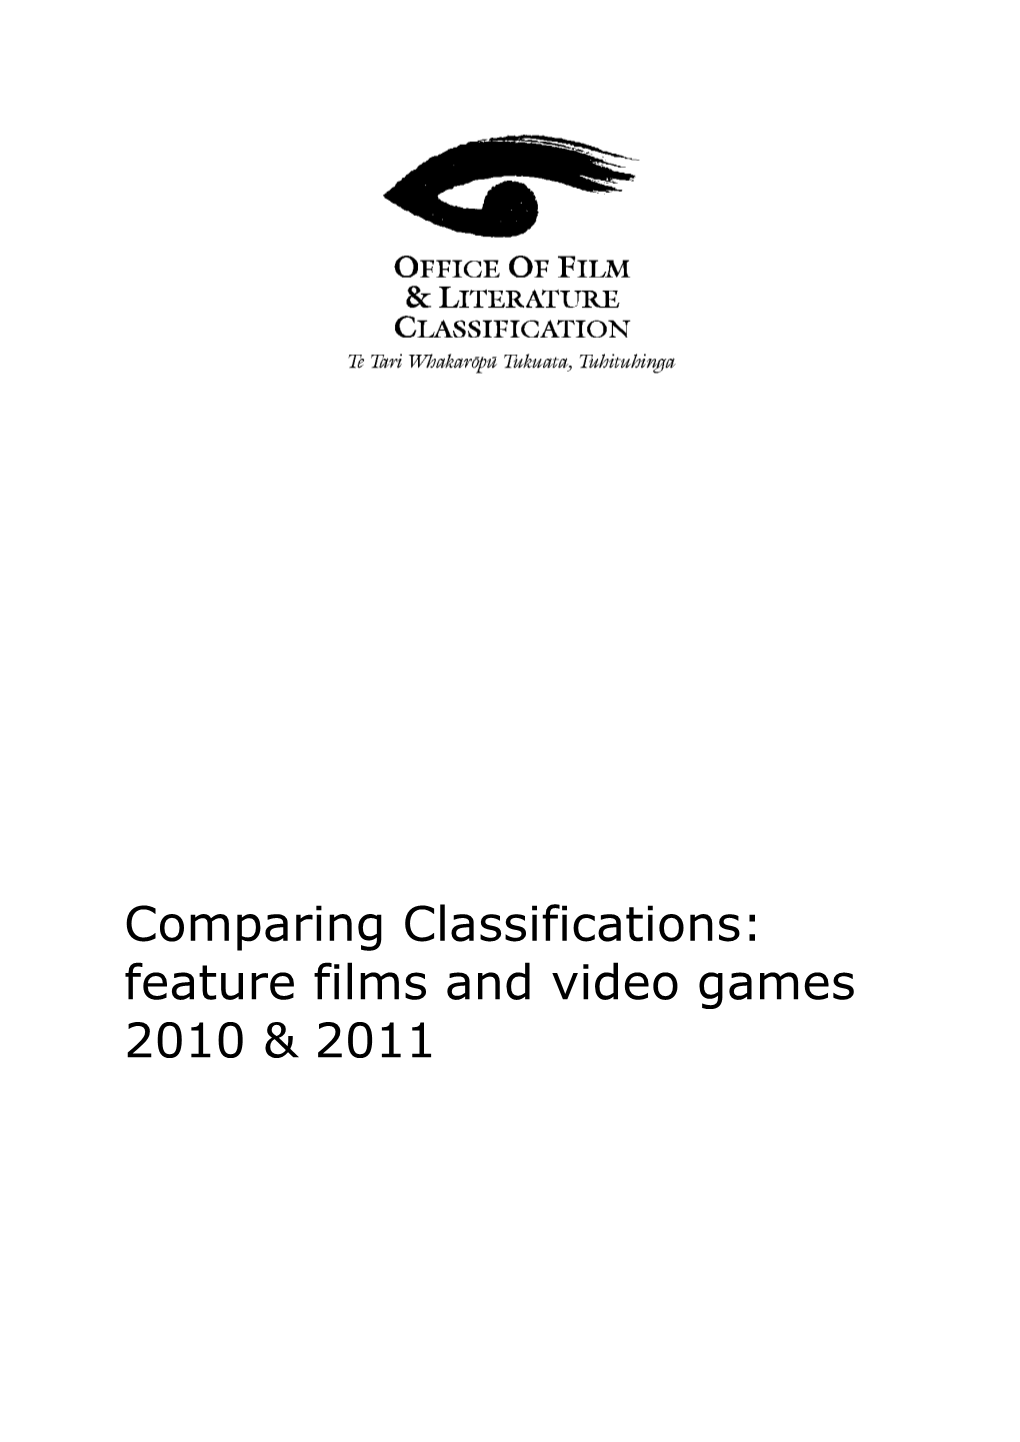 Office of Film and Literature Classification Comparing Classifications 2010 & 2011